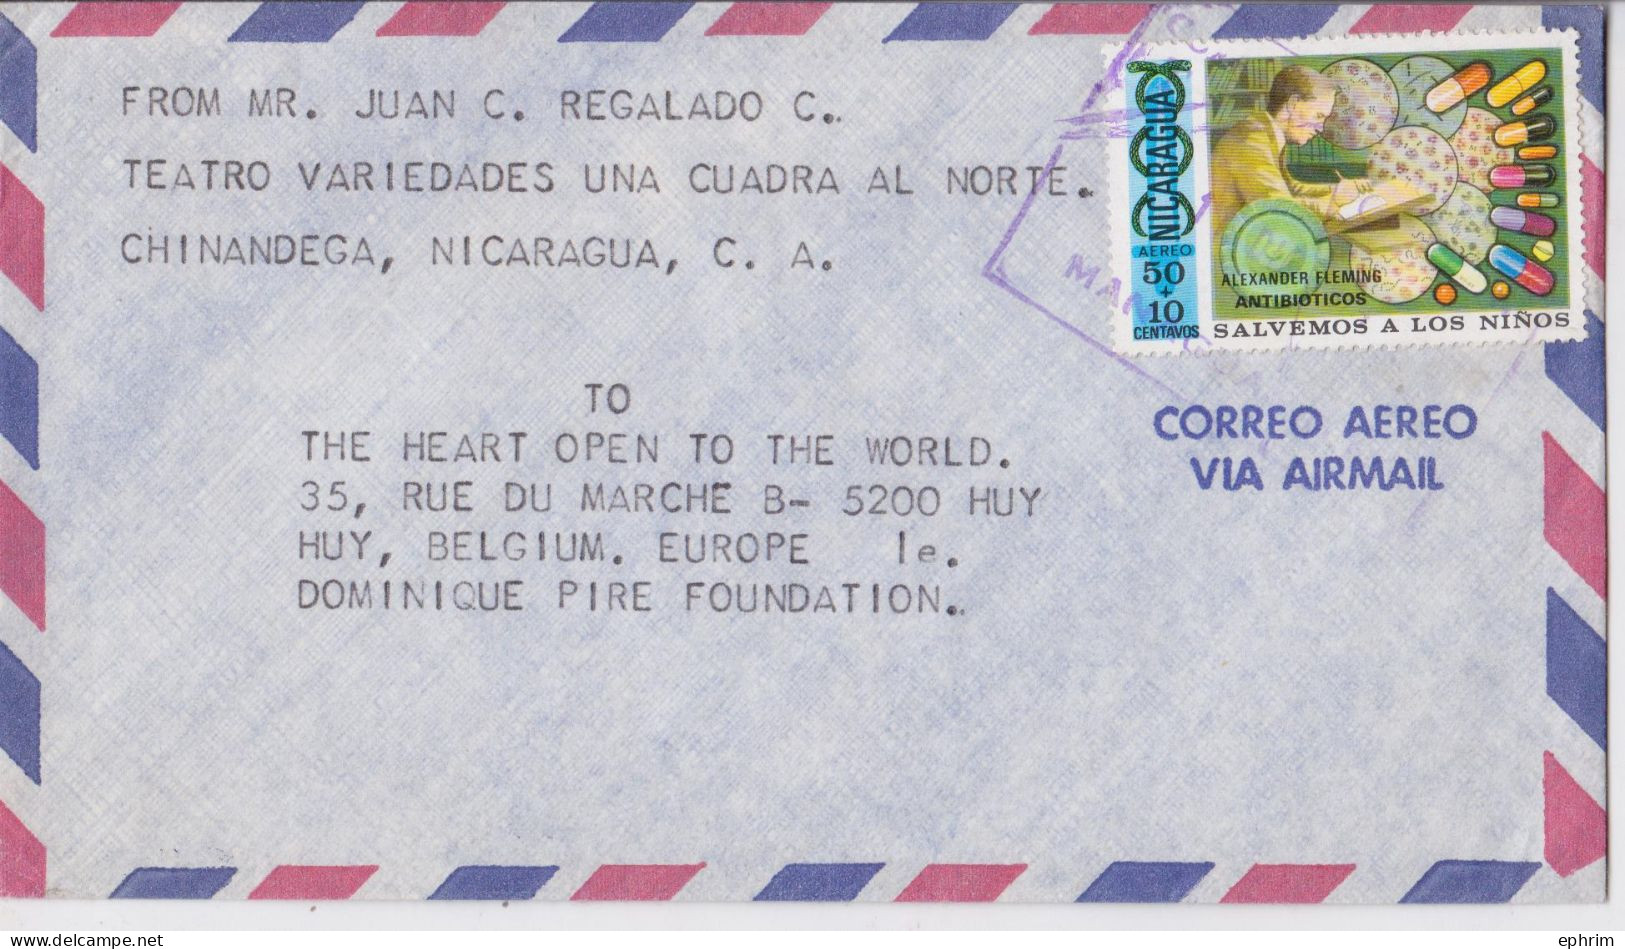 Nicaragua Lettre Timbre Alexander Fleming Antibioticos Médecine Biologie Bactérie Stamp Mail Cover Sello Correo Aereo - Nicaragua